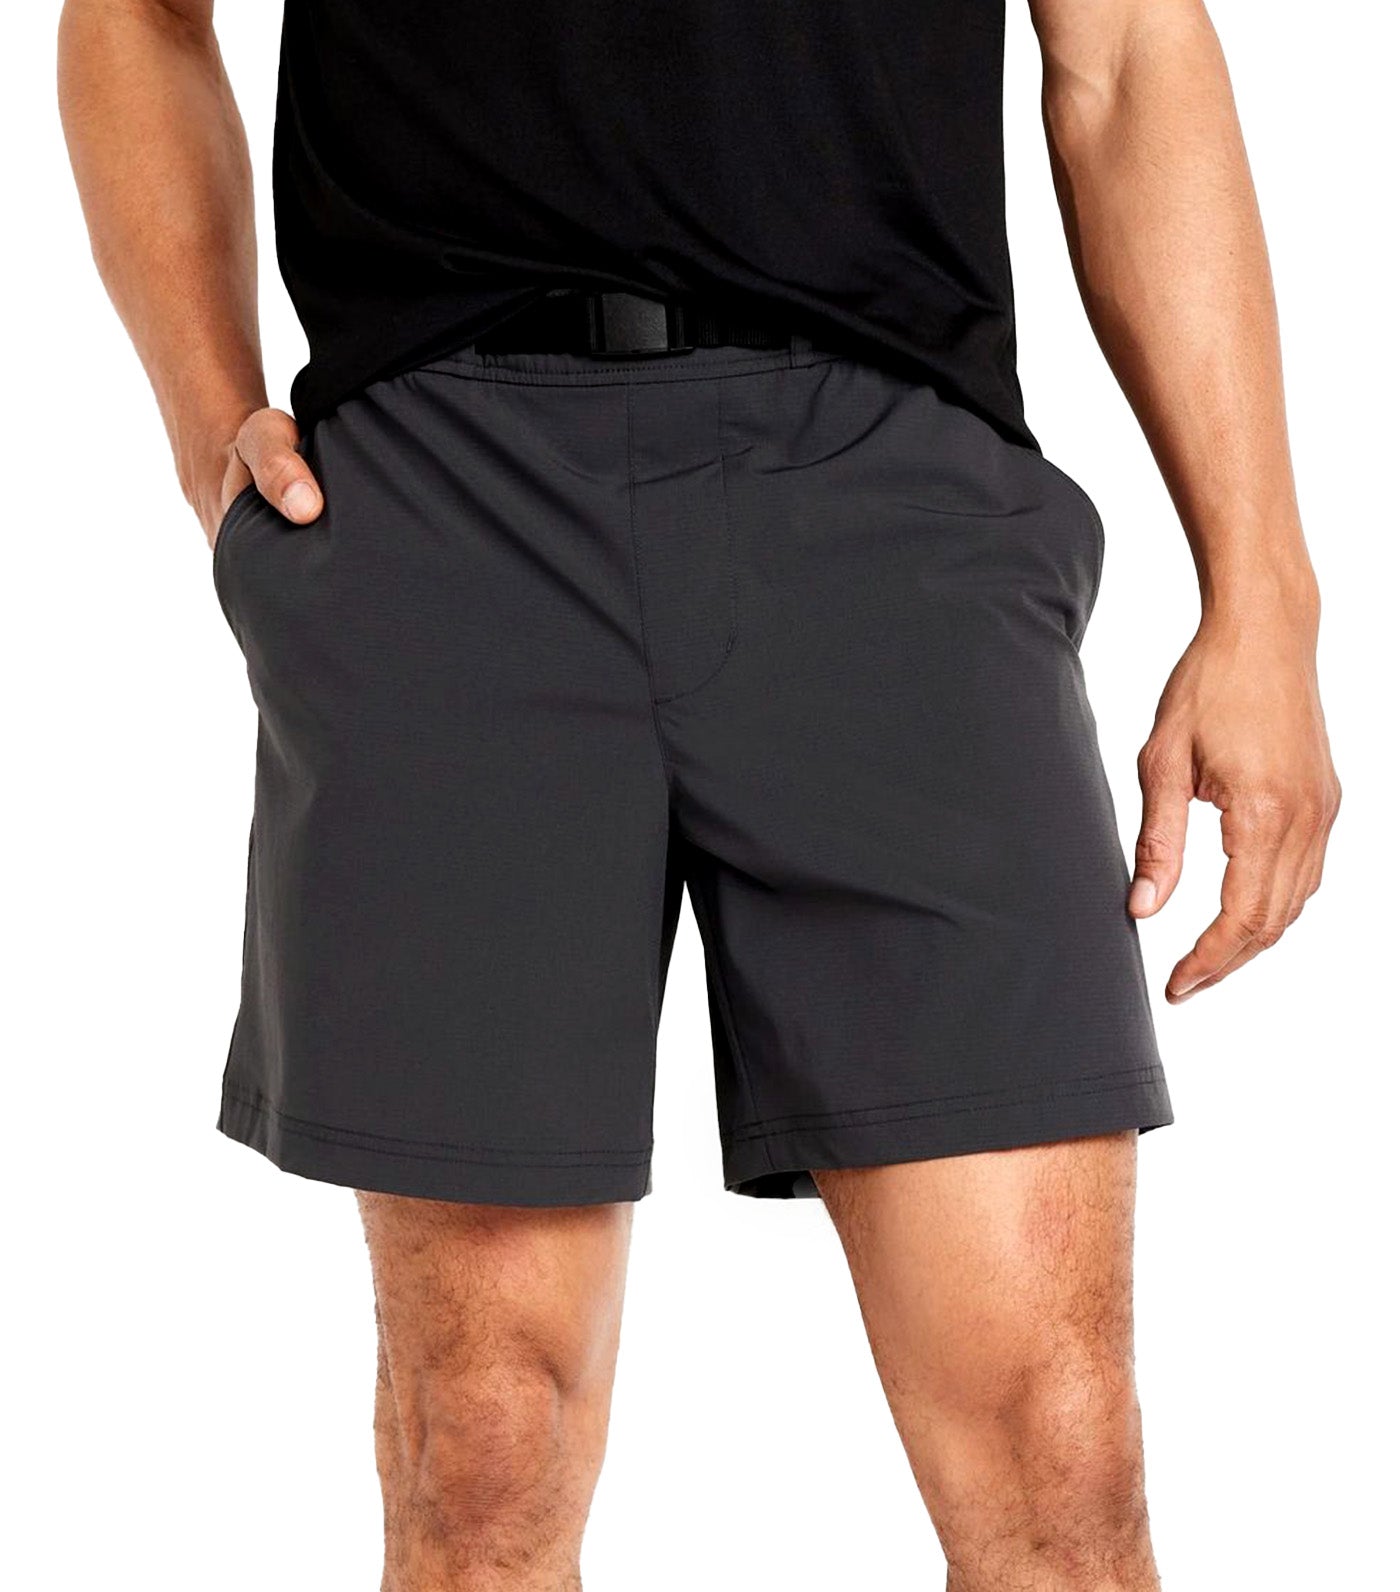 Tech Performance Shorts for Men 7-Inch Inseam Panther